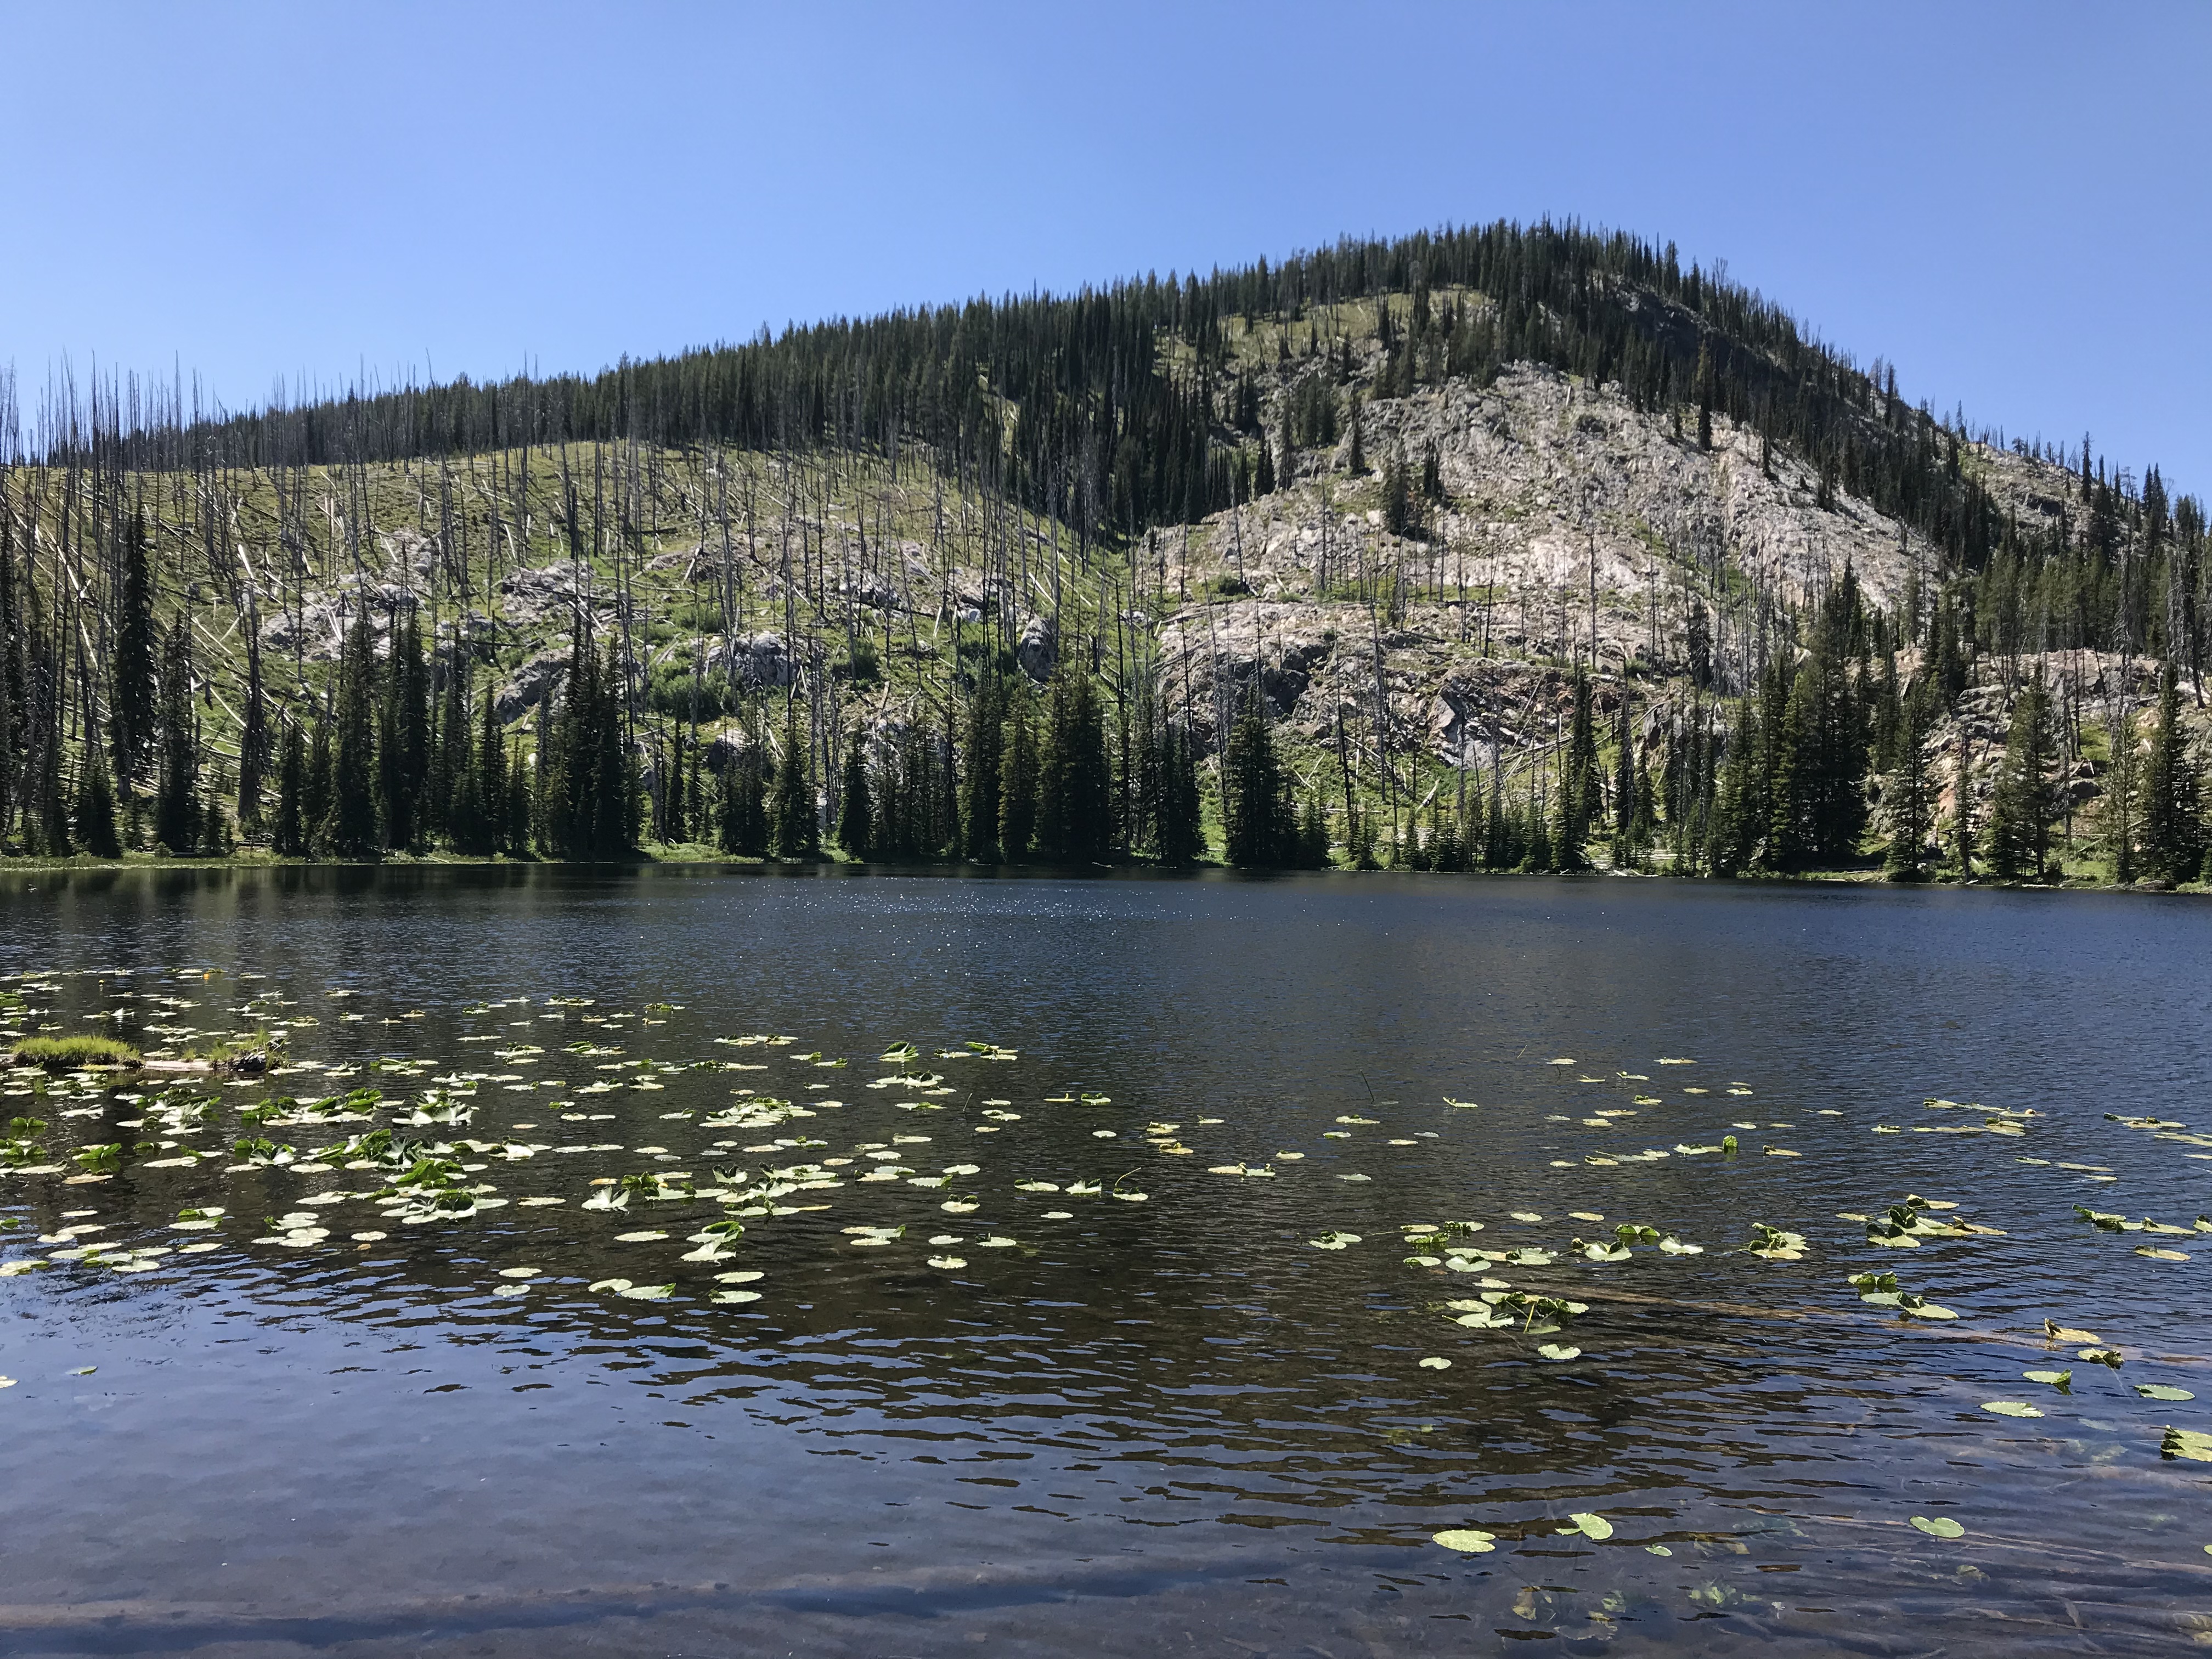 California Lake represents one of the many tupes of terrain found in the northwest corner of the Salmon River Mountains.